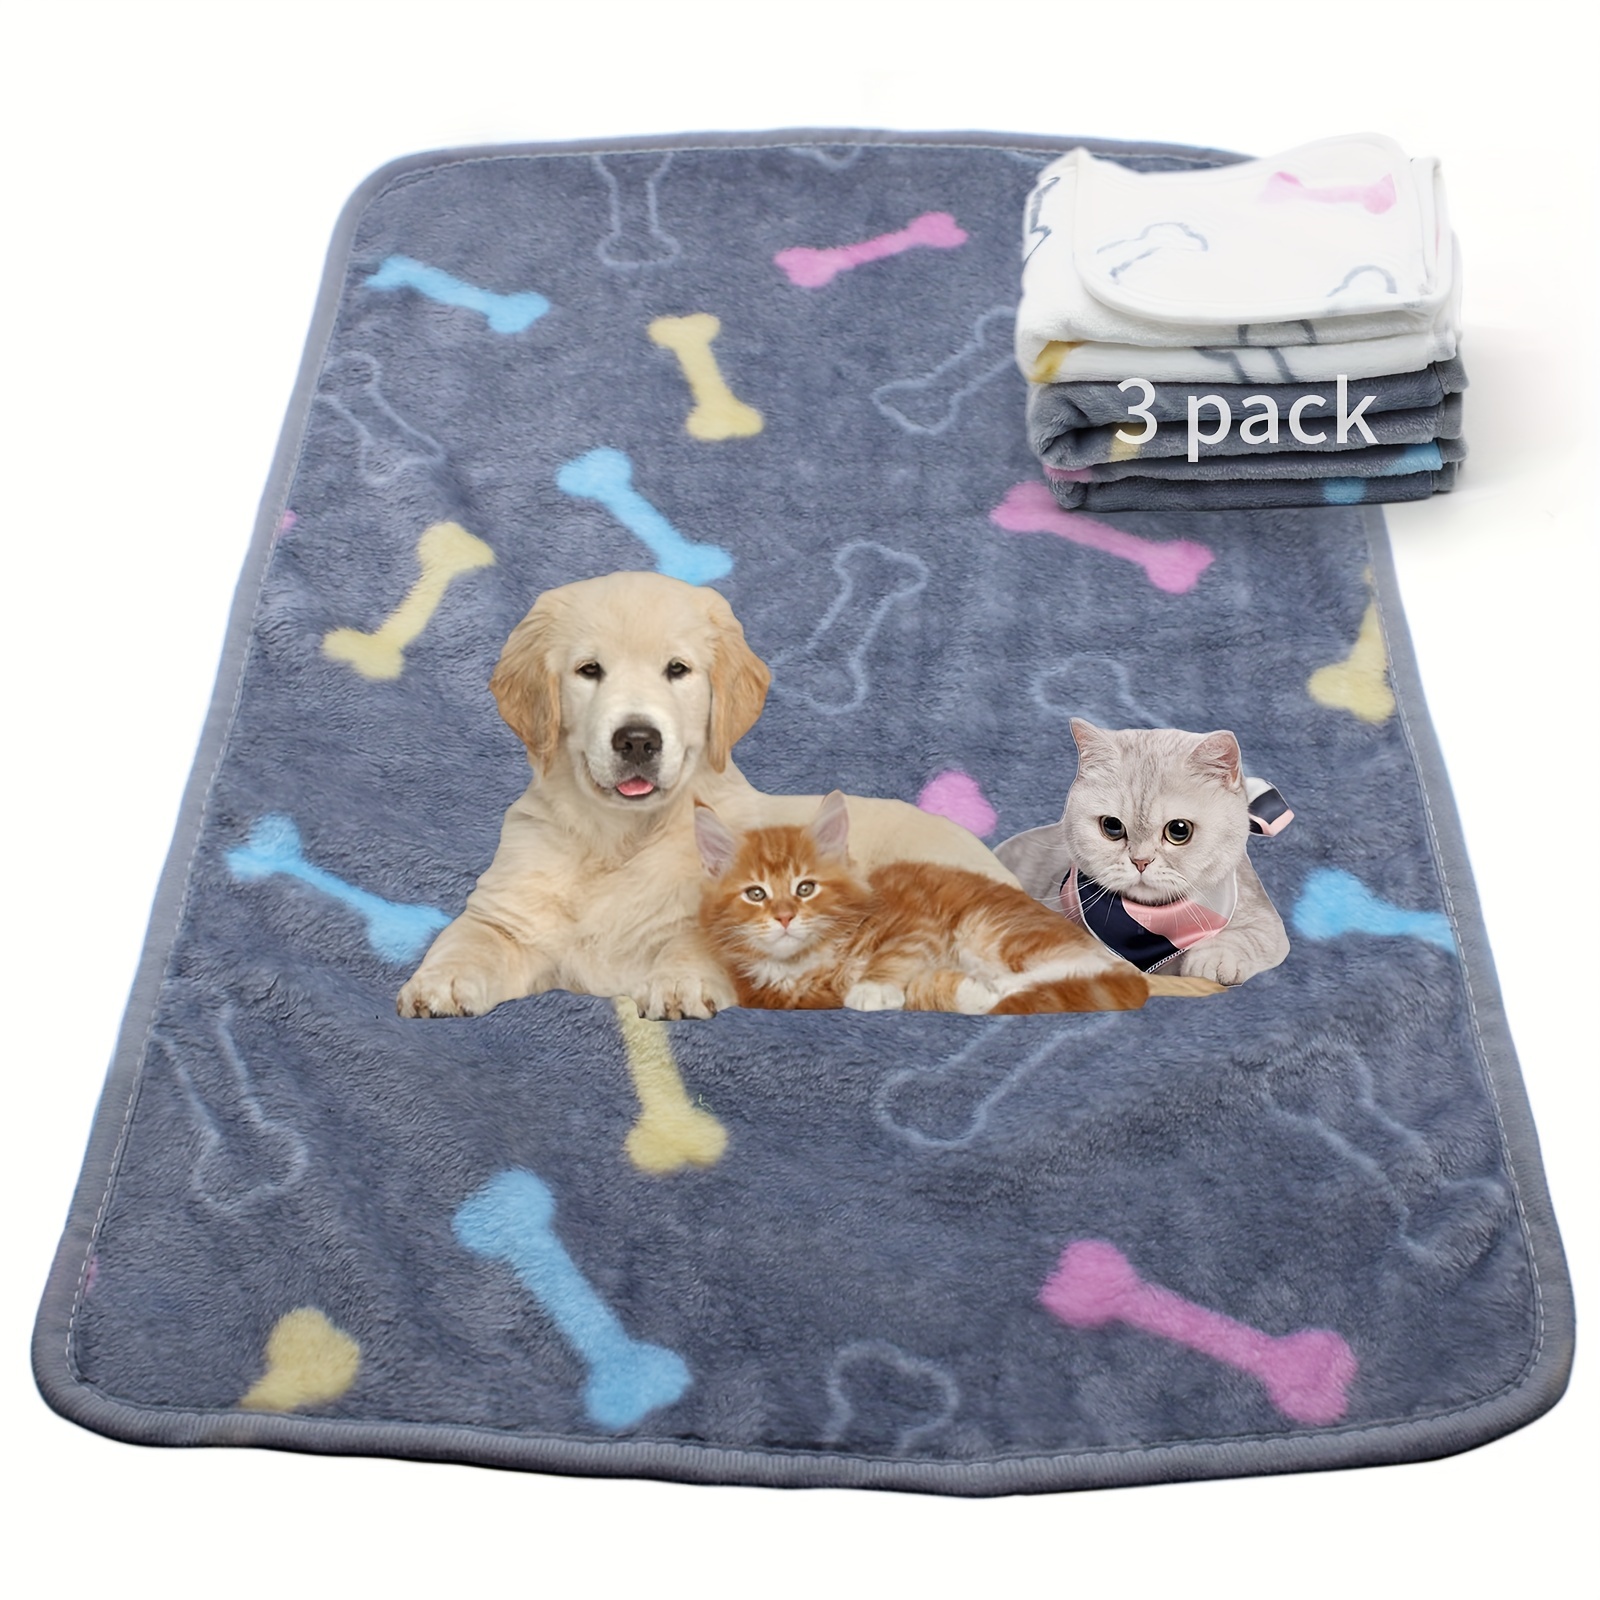 

3-pack Dog Blanket For Dogs, Super Soft Fluffy Premium Fleece Dogs Cats Pads, Pet Blanket Flannel Throw For Small Medium Large Dog Bed & Couch